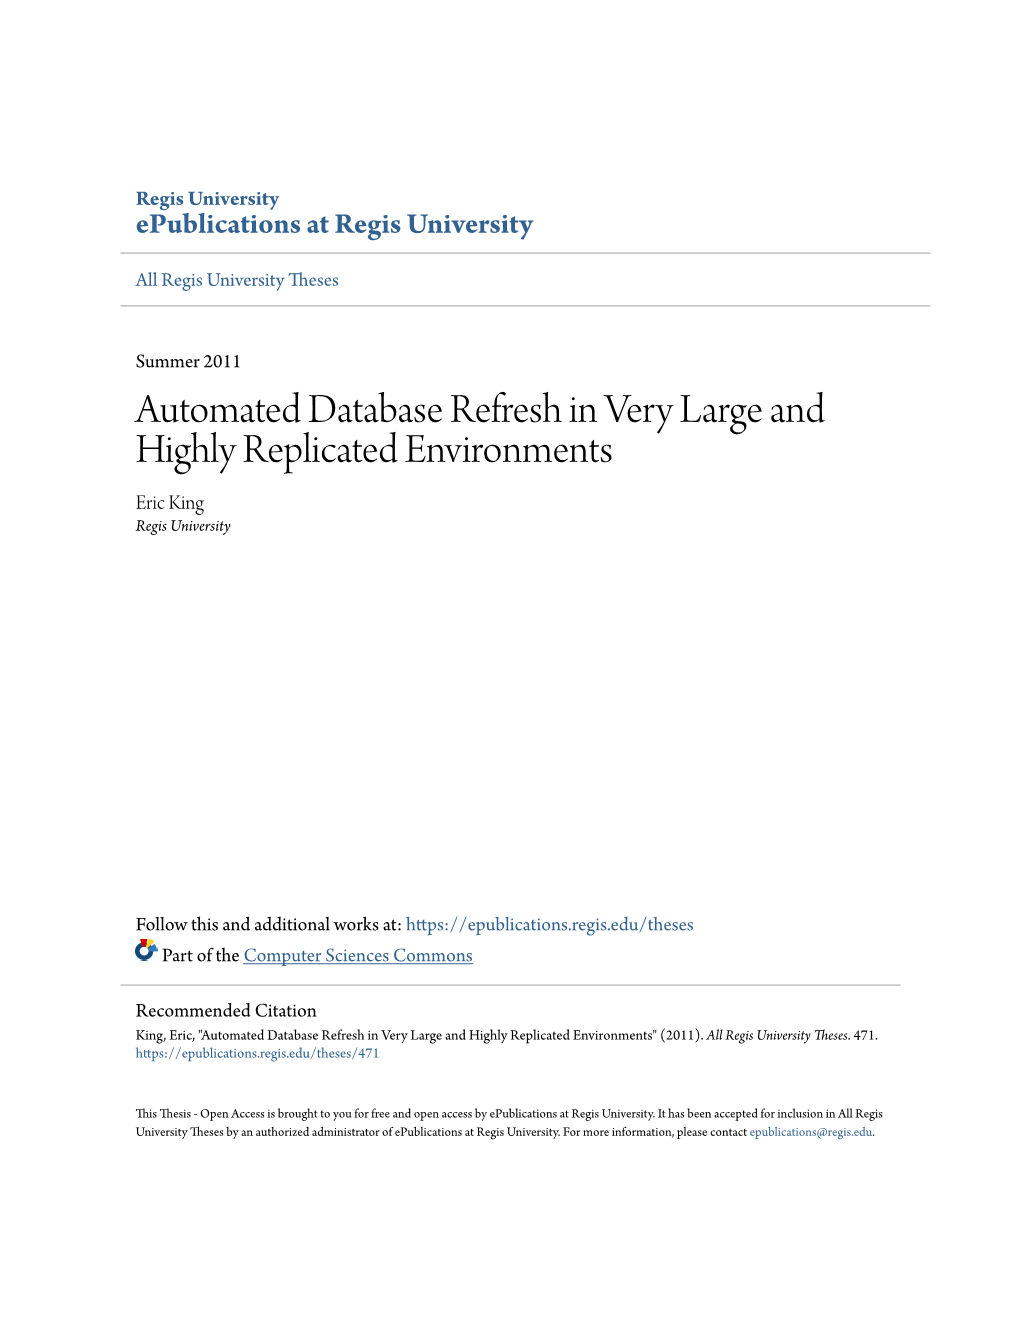 Automated Database Refresh in Very Large and Highly Replicated Environments Eric King Regis University